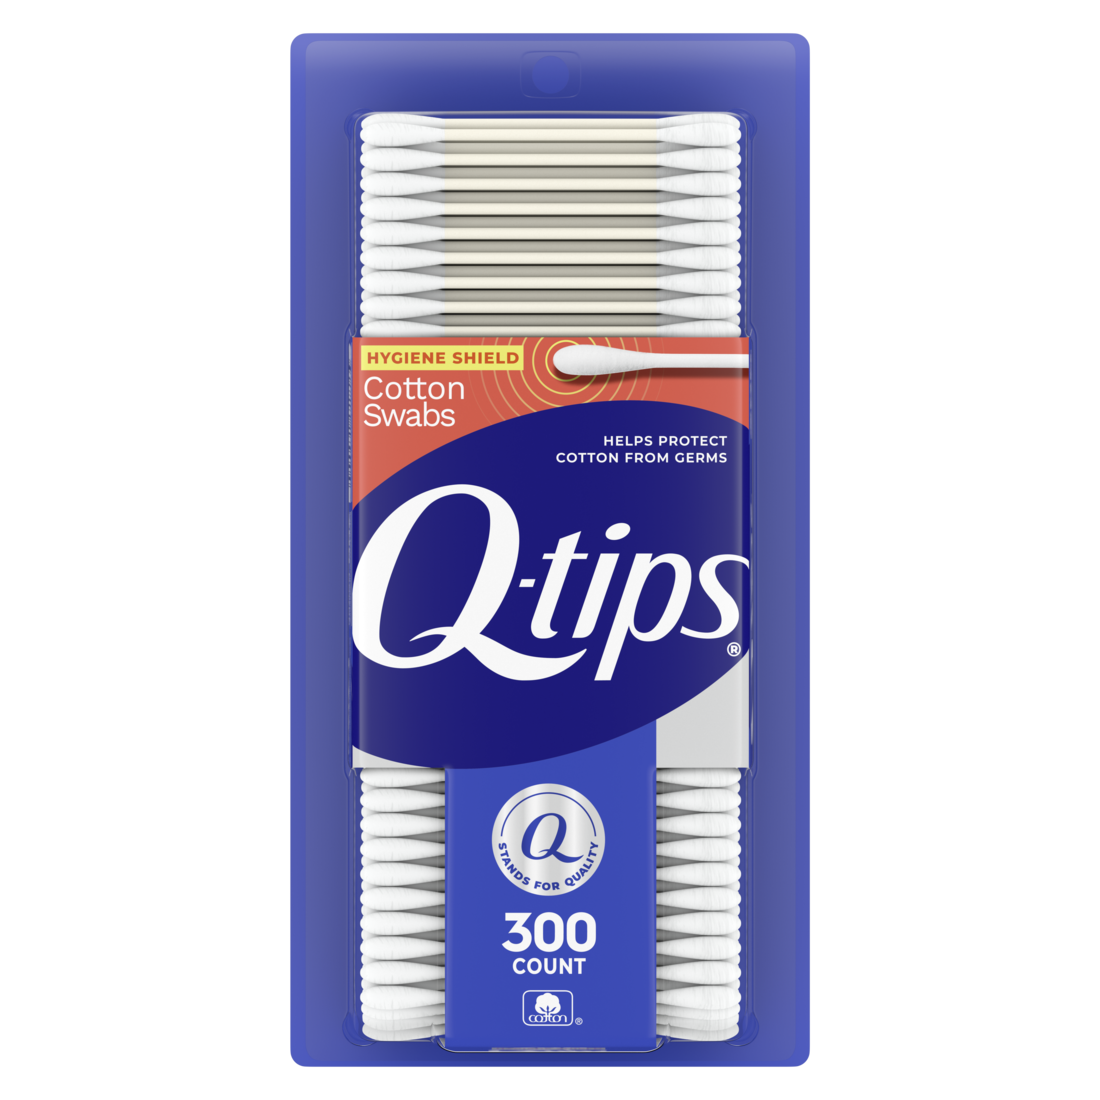 Q-tips Cotton Swabs, Hygiene Shield, 300 Count - image 1 of 7